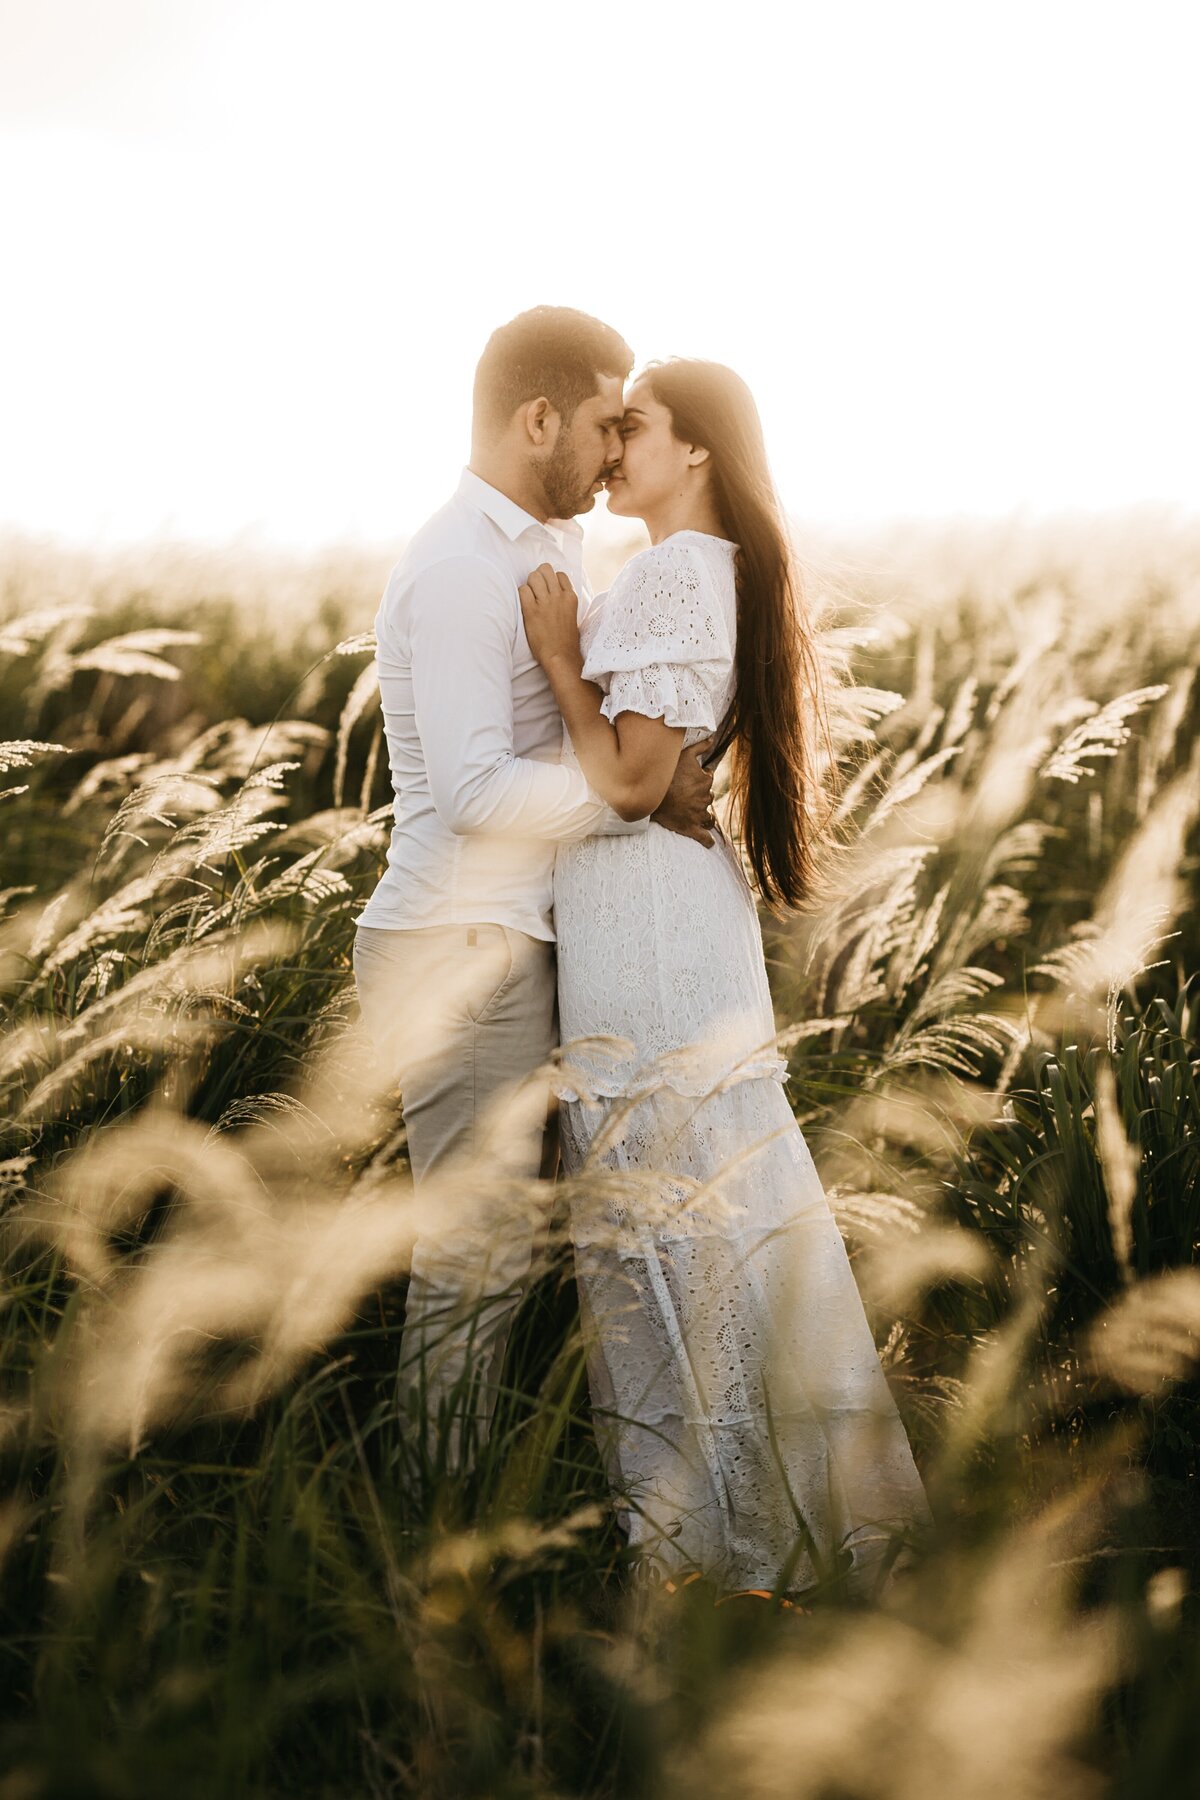 man-and-woman-kissing-on-grass-field-3534497